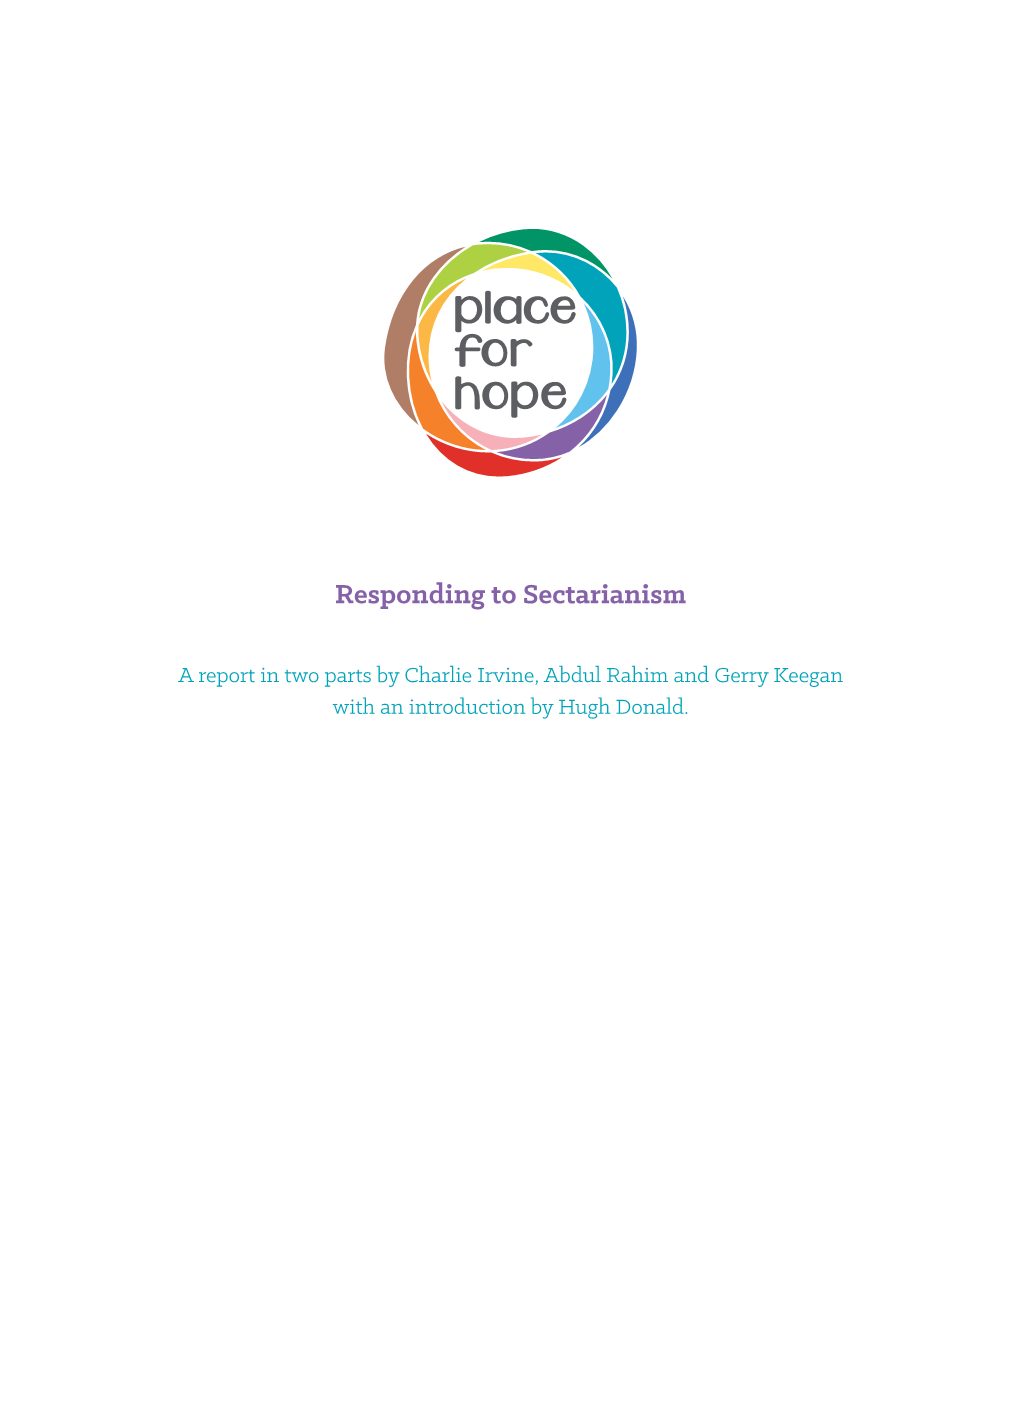 The Responding to Sectarianism Report